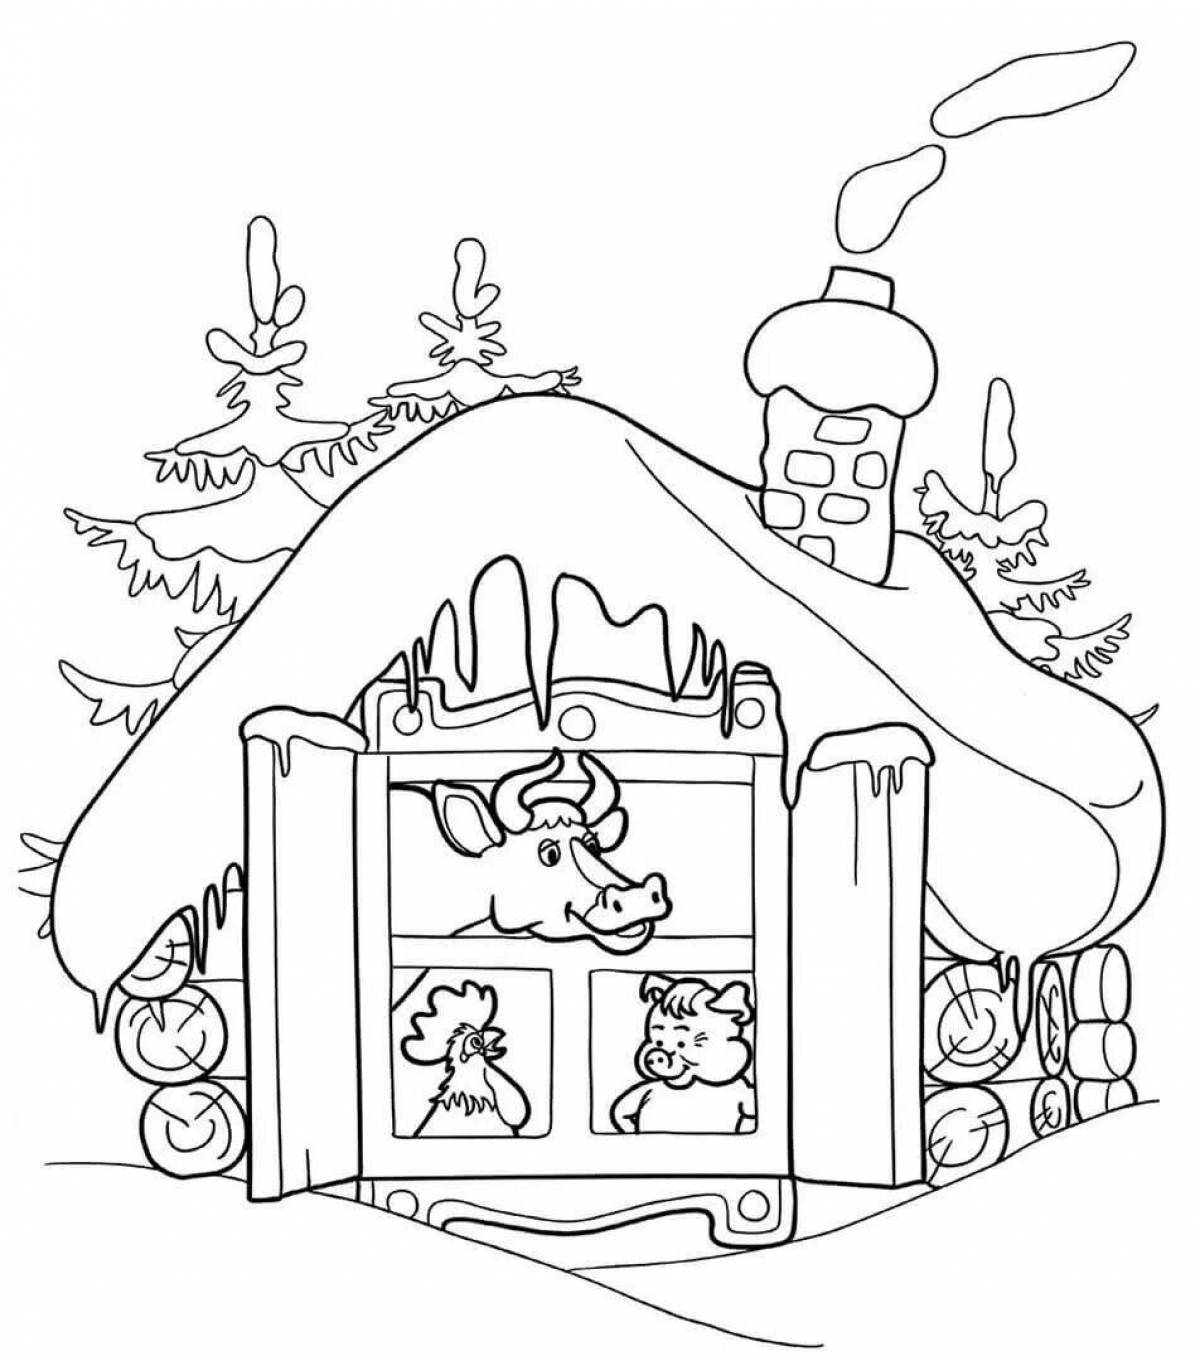 Living winter hut coloring book for kids